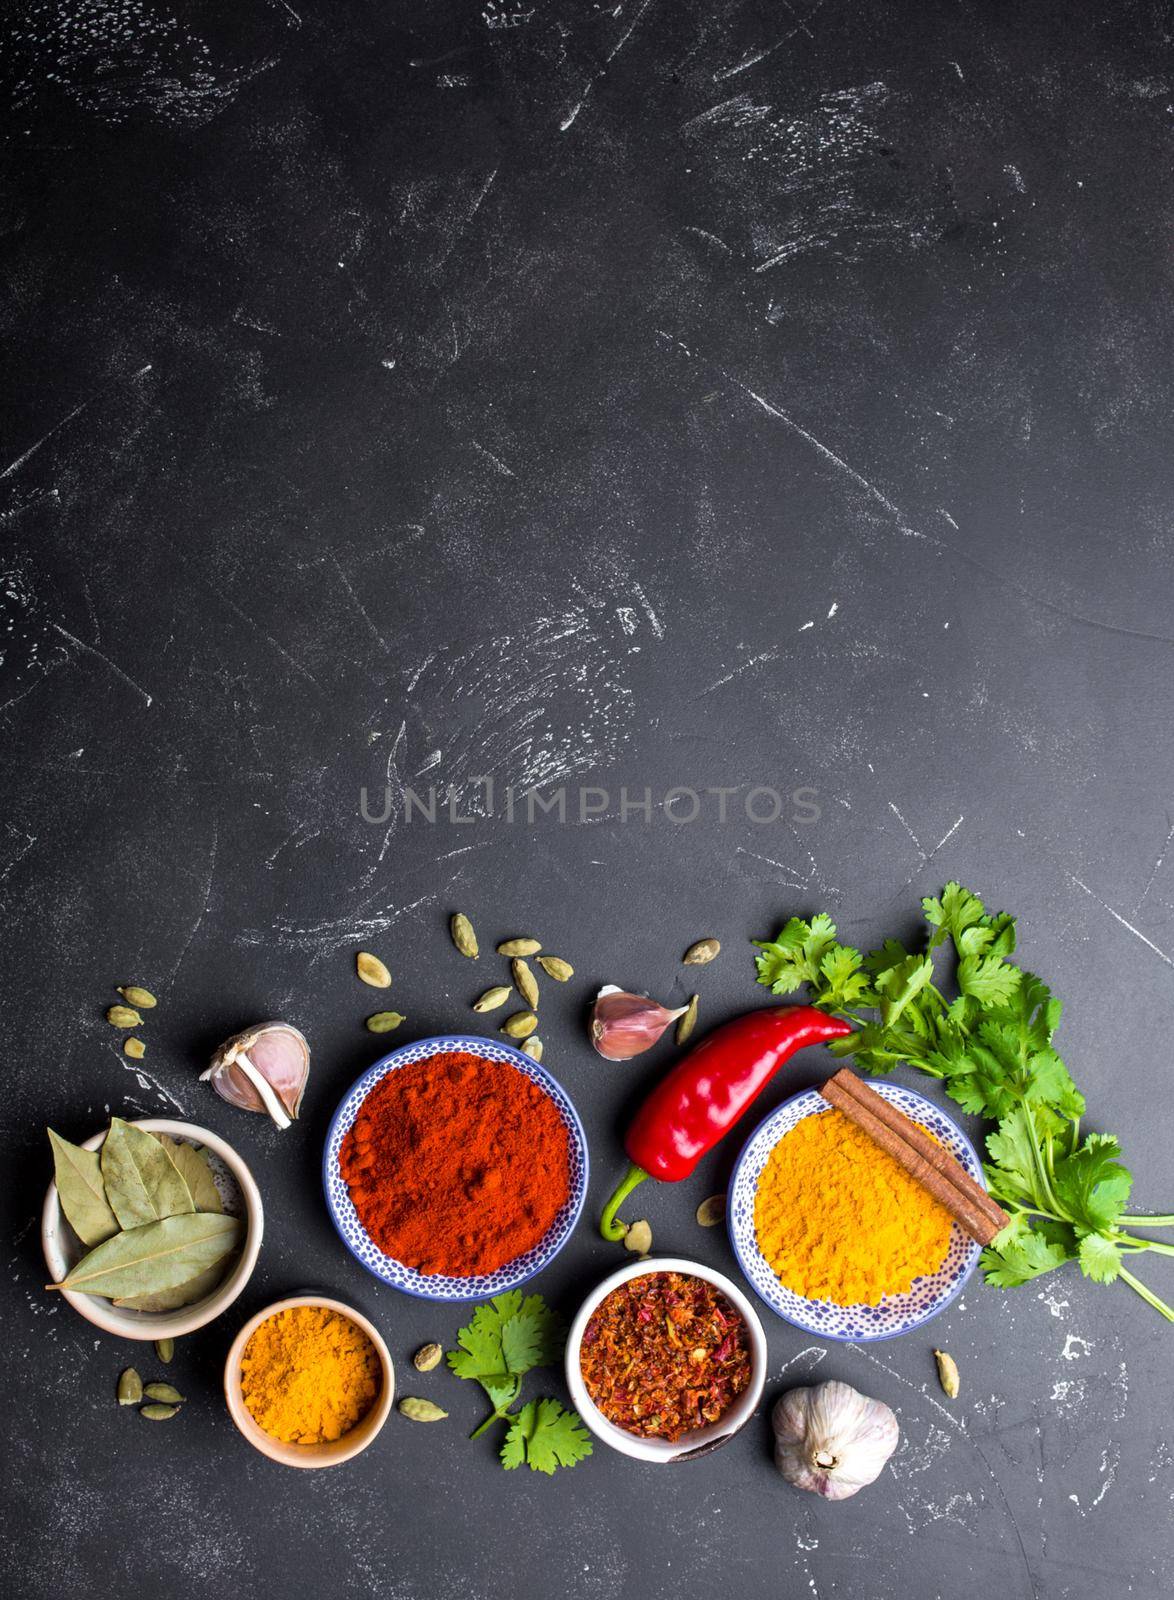 Indian food cooking background. Traditional Indian spices and ingredients. Curry, turmeric, cardamom, garlic, pepper, fresh cilantro, cinnamon. Preparing exotic meal. Top view, space for text